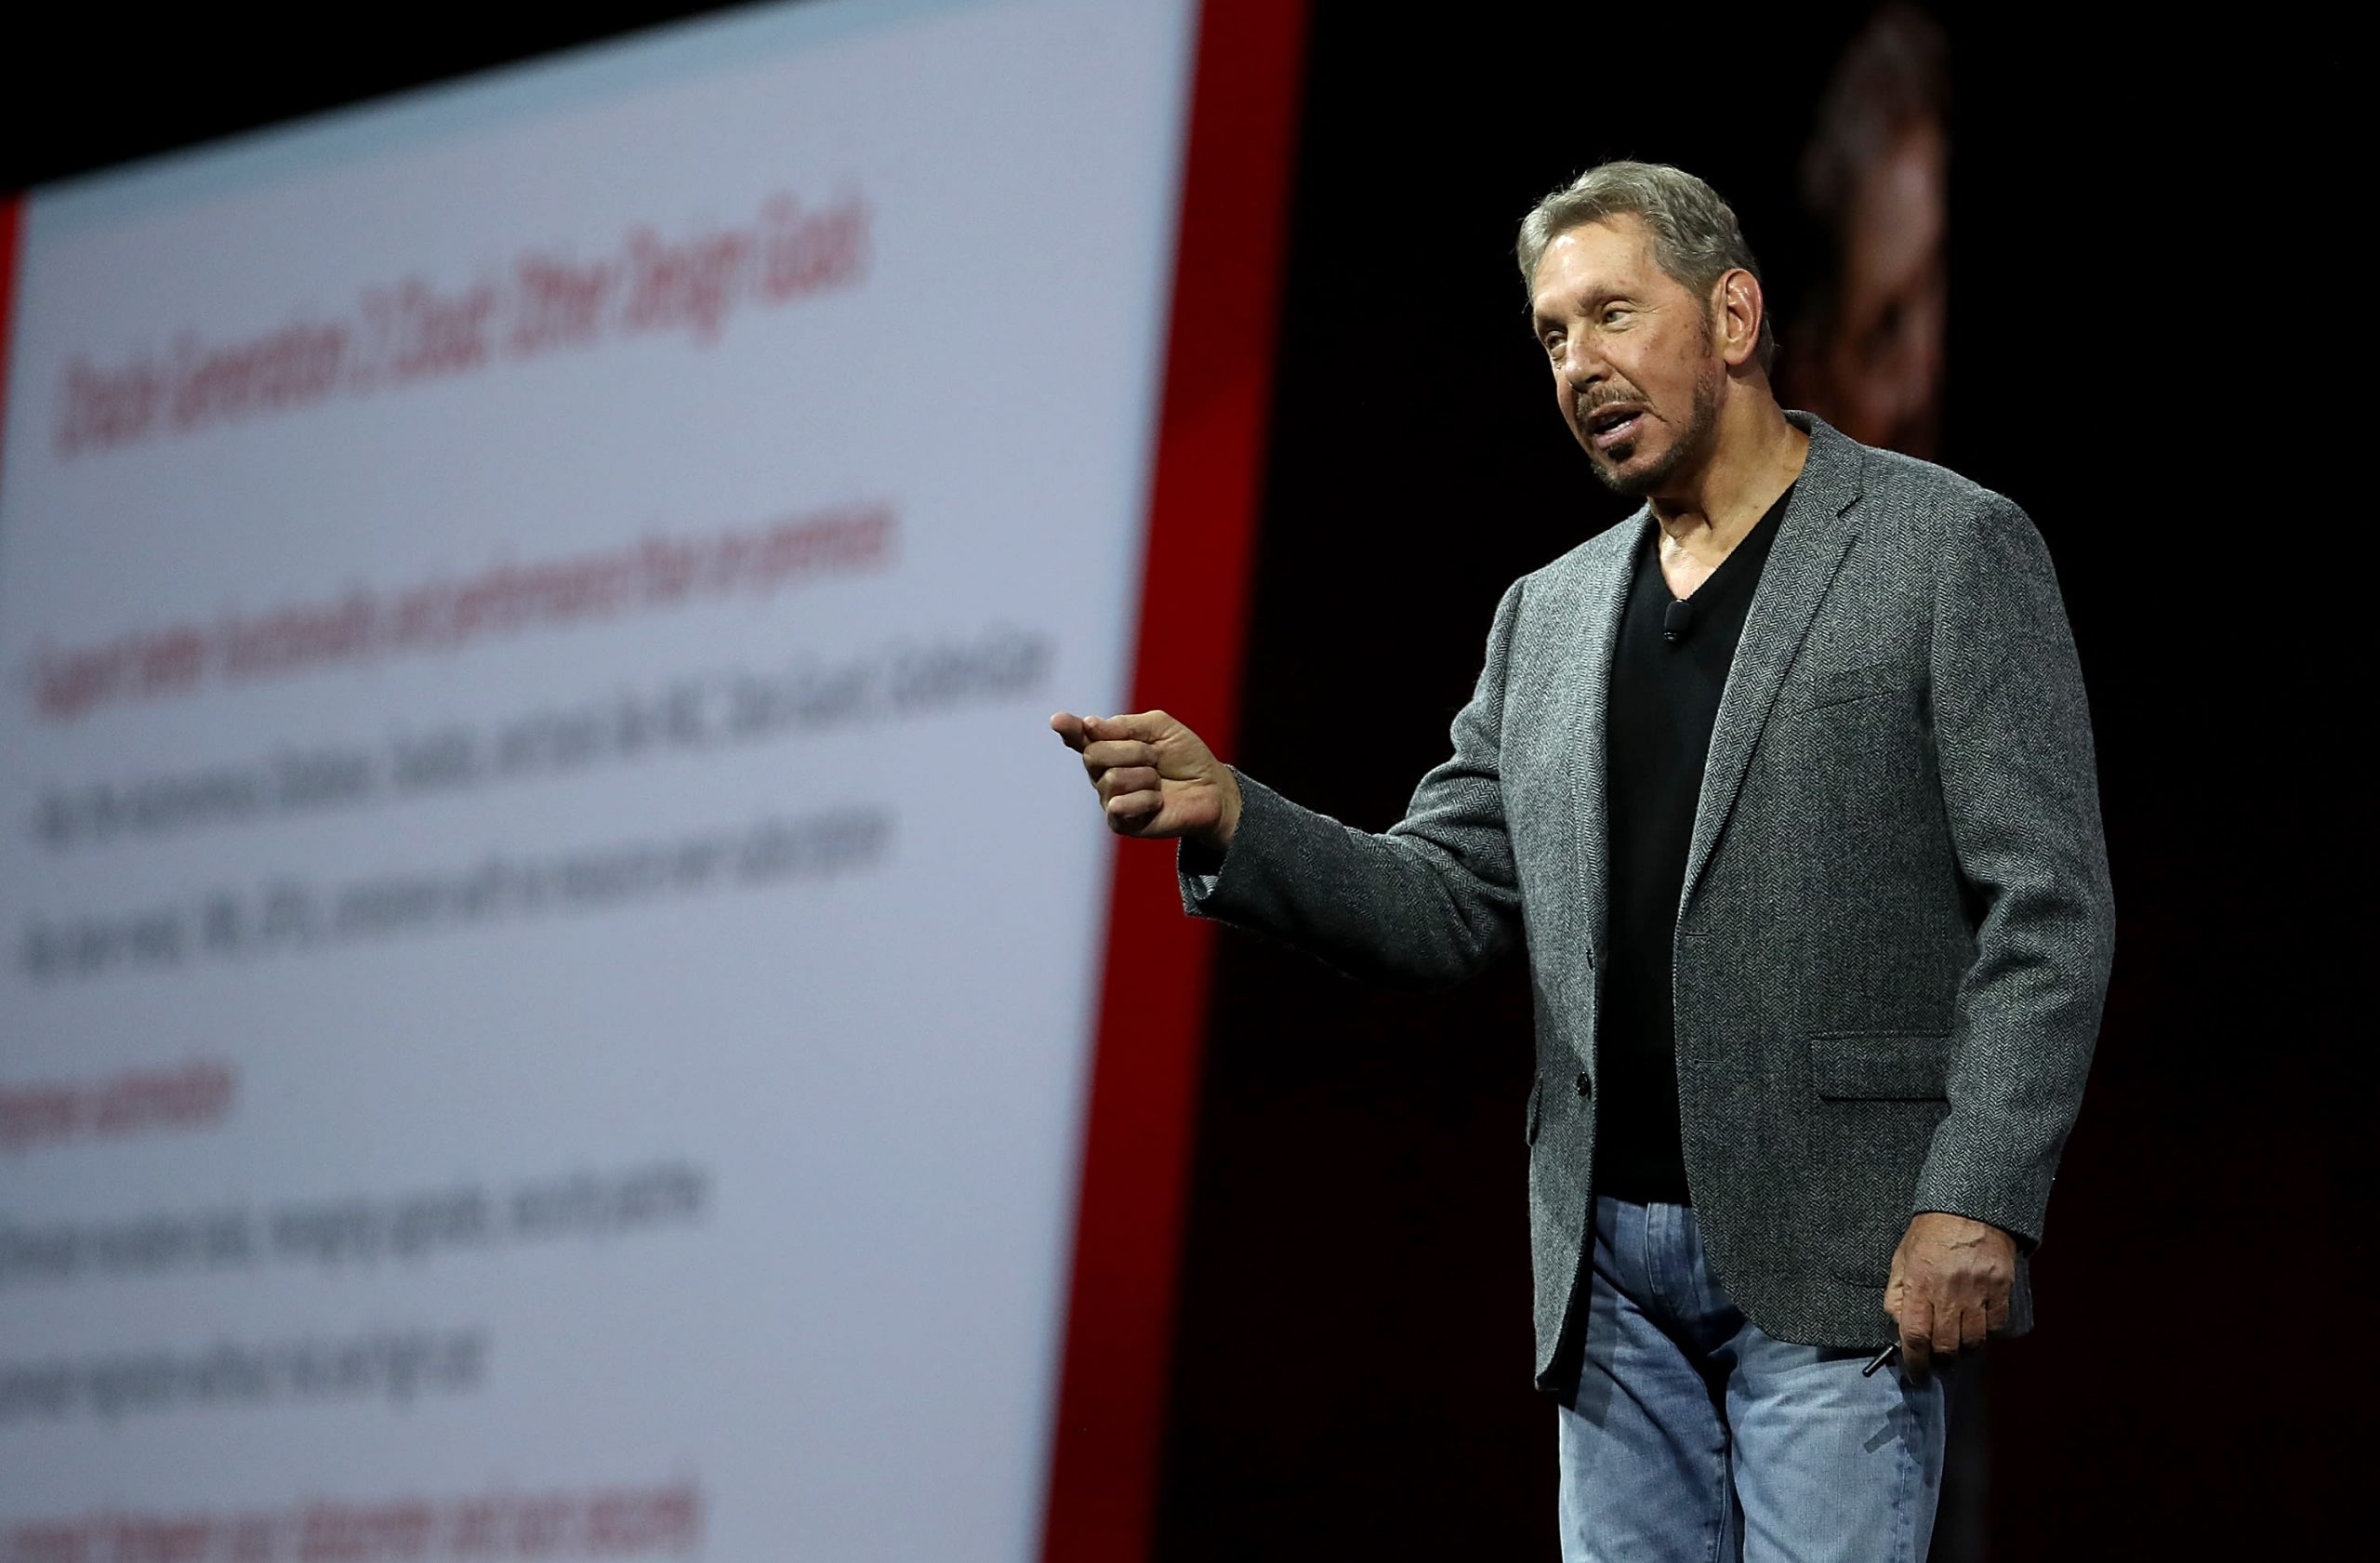 Oracle confirms agreement to become 'trusted technology provider'